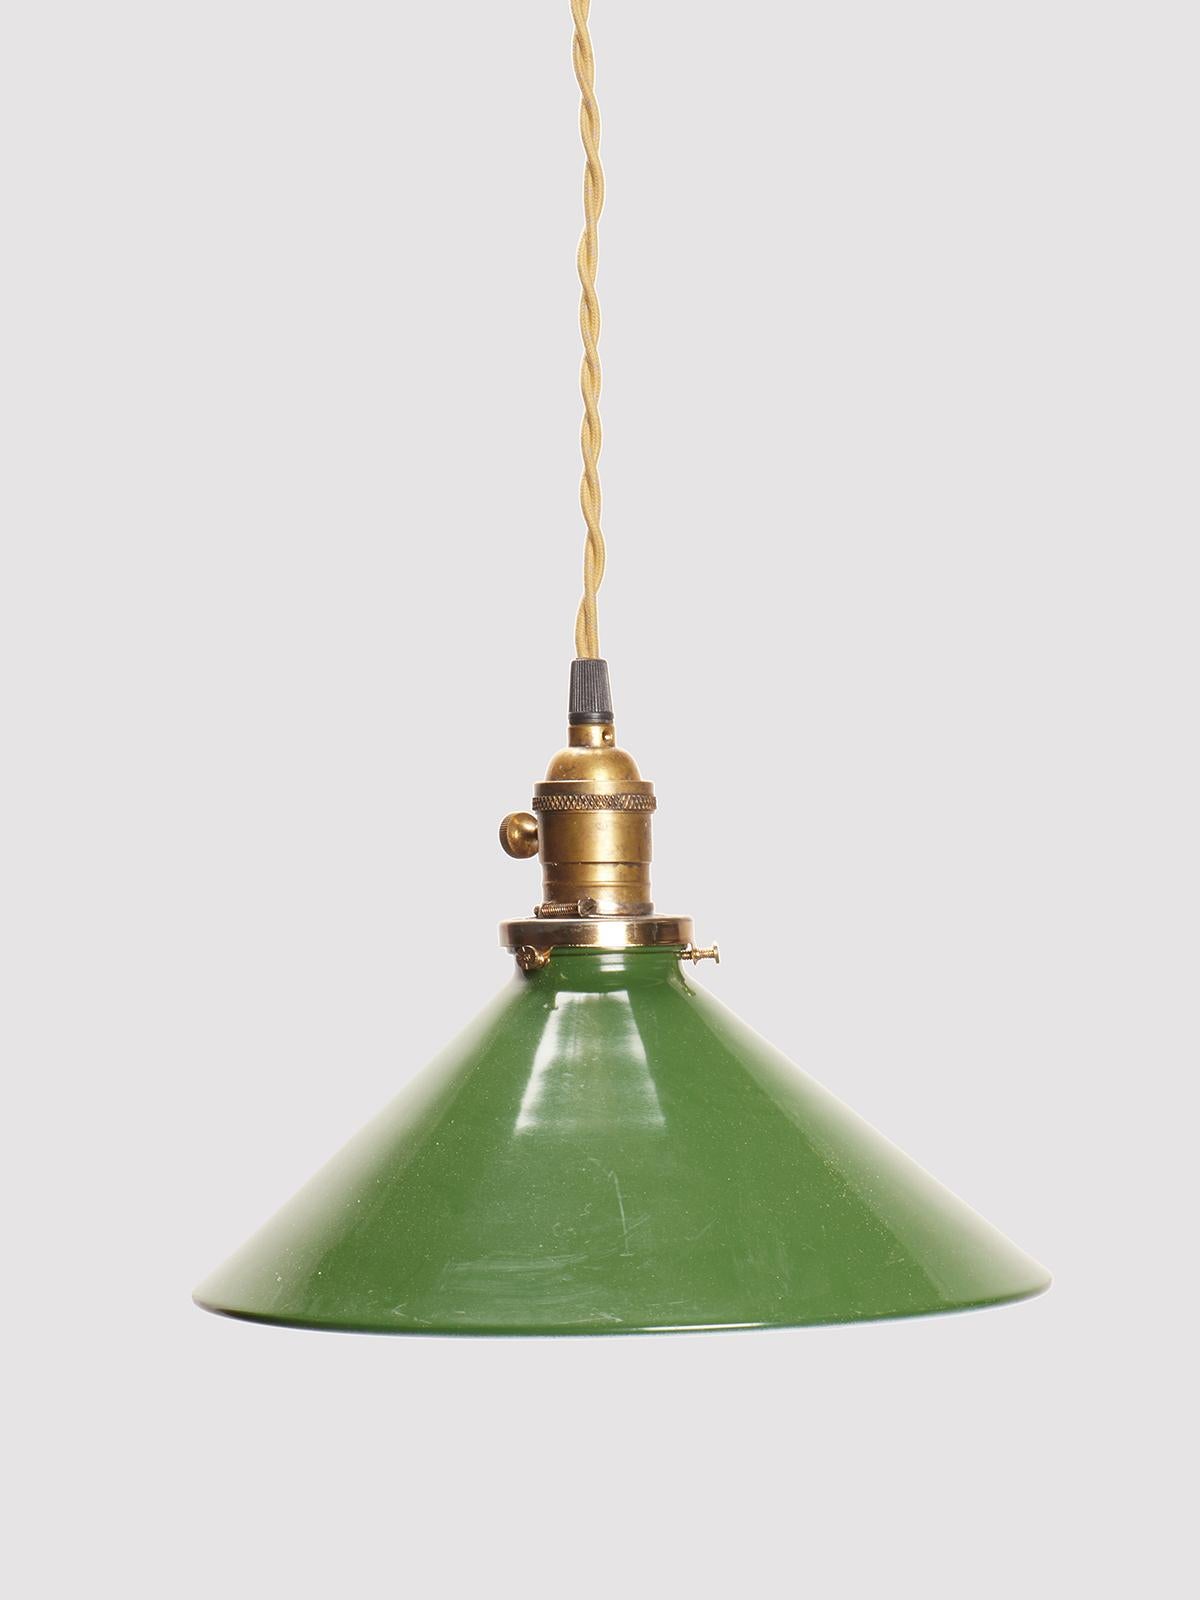 20th Century Industrial Enameled Swinging Lamps, USA, circa 1920 For Sale